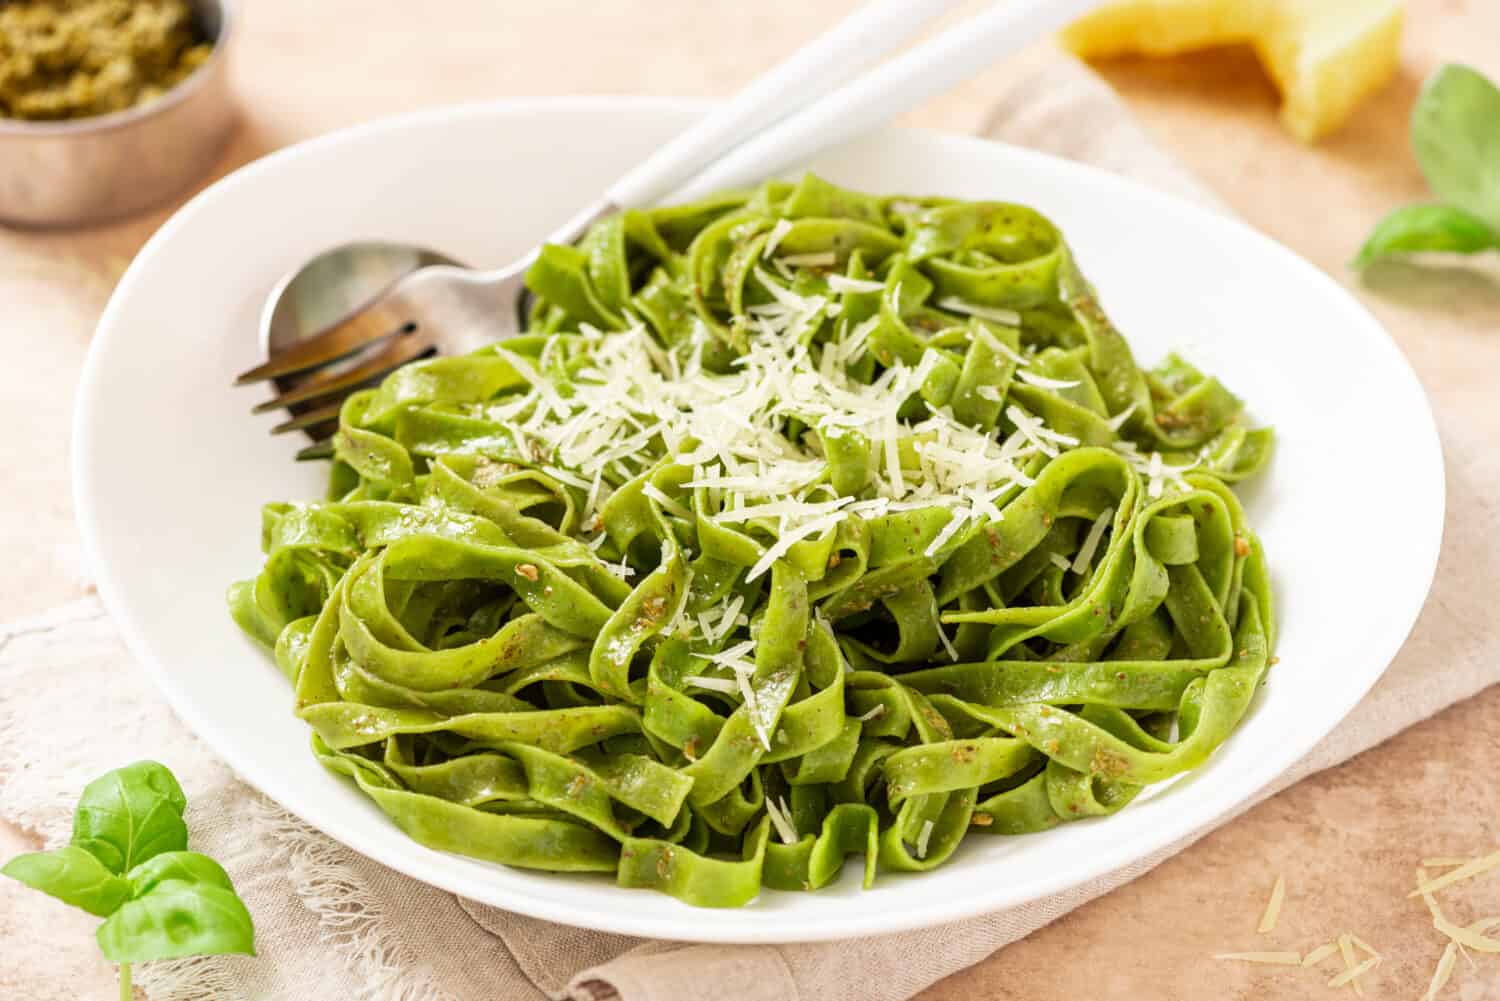 Spinach pasta with pesto sauce and grated cheese in a white plate on a light background. Italian food, Mediterranean cuisine. Green tagliatelle pasta with pesto and parmesan.